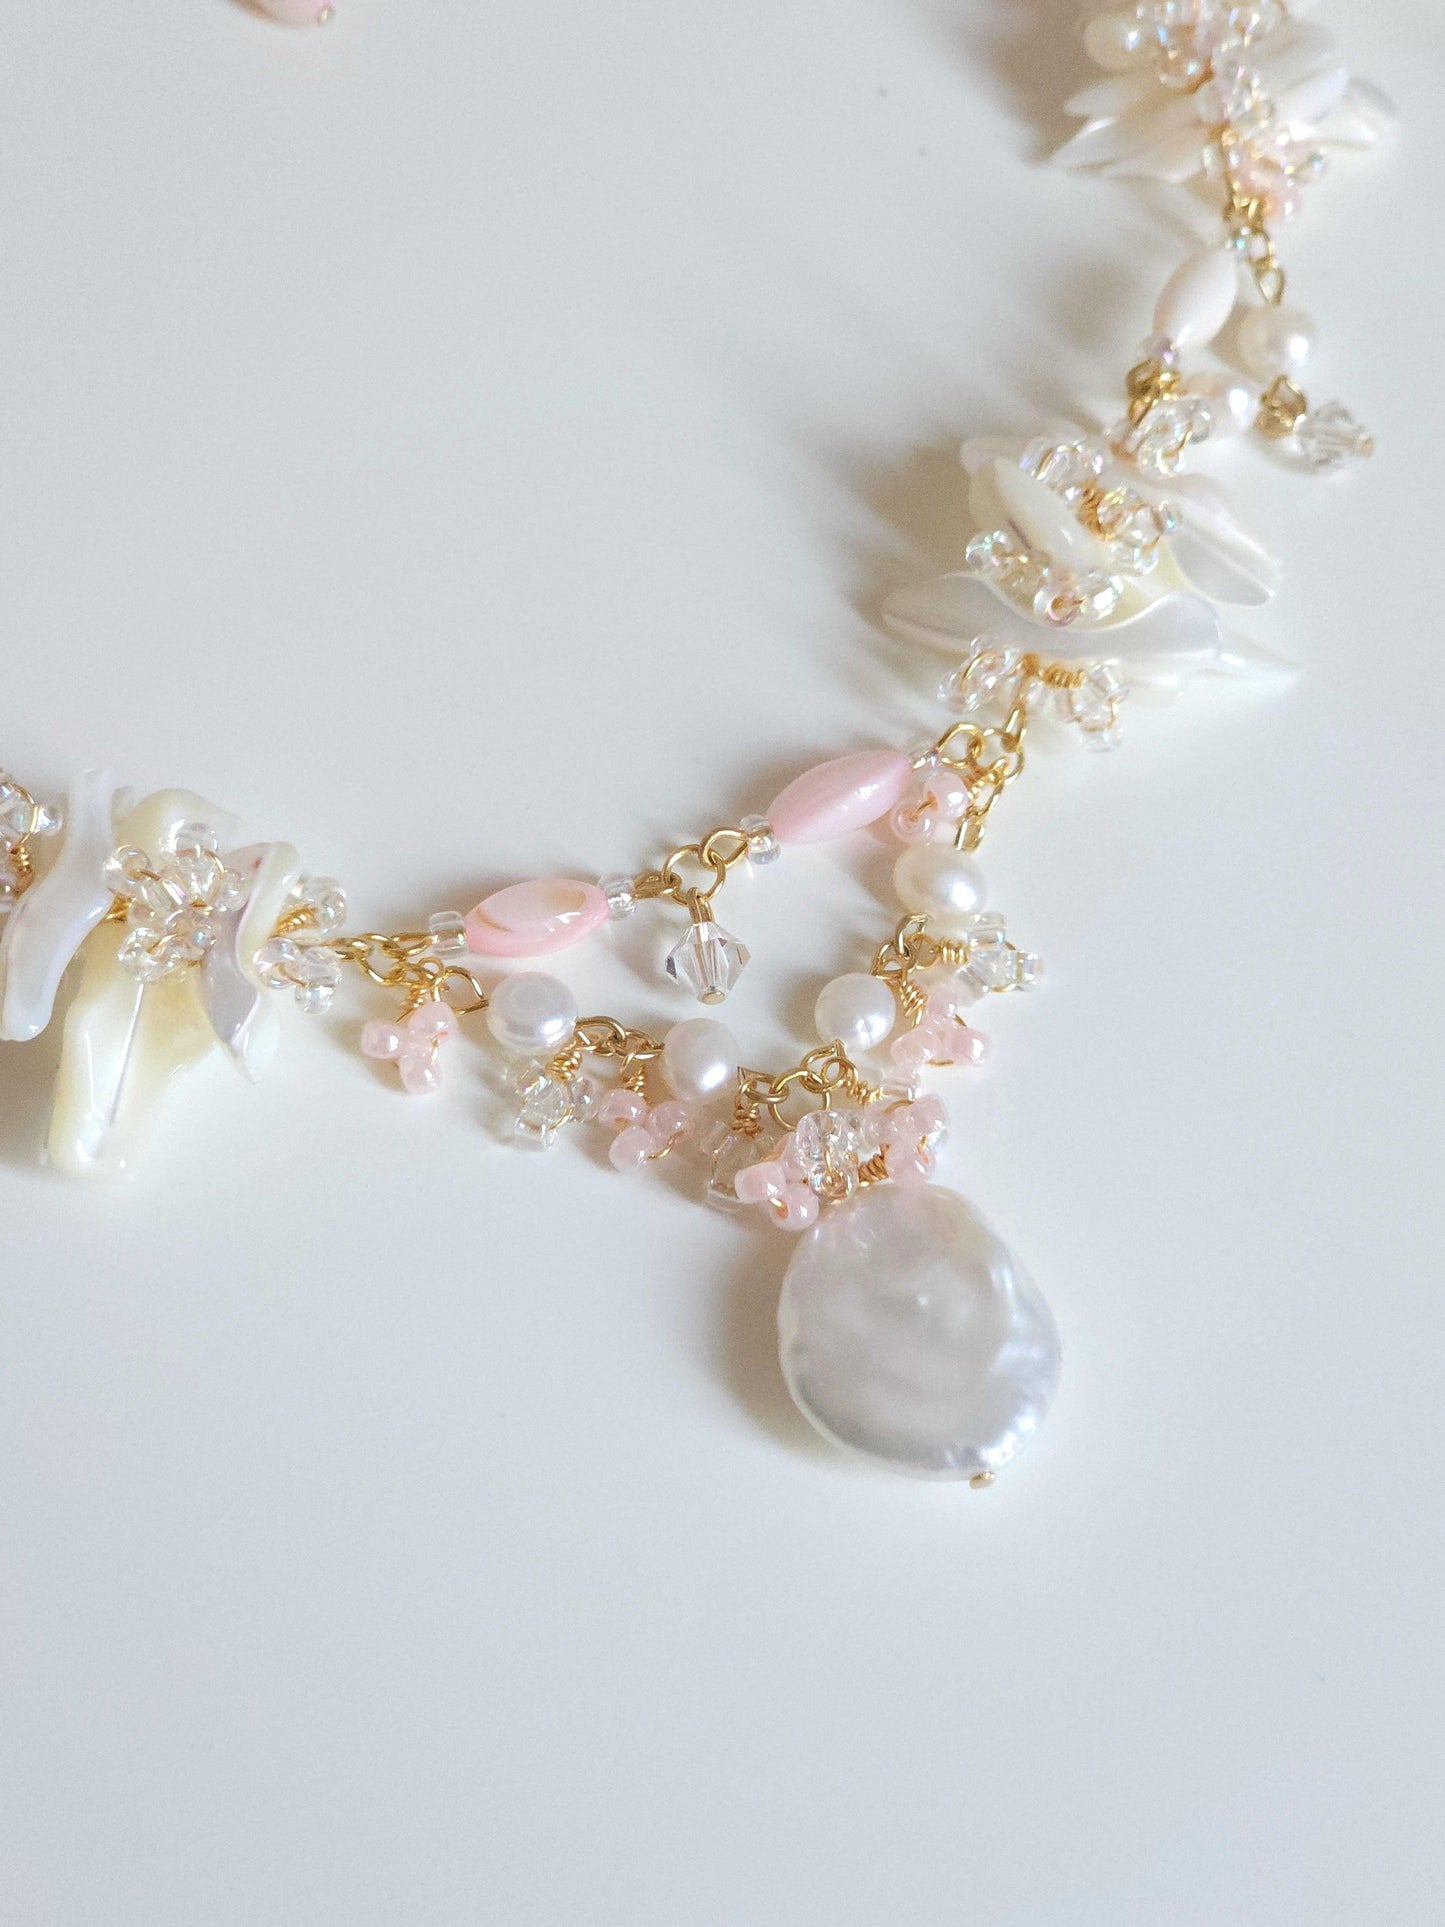 Mermaid's Blush Necklace - By Cocoyu